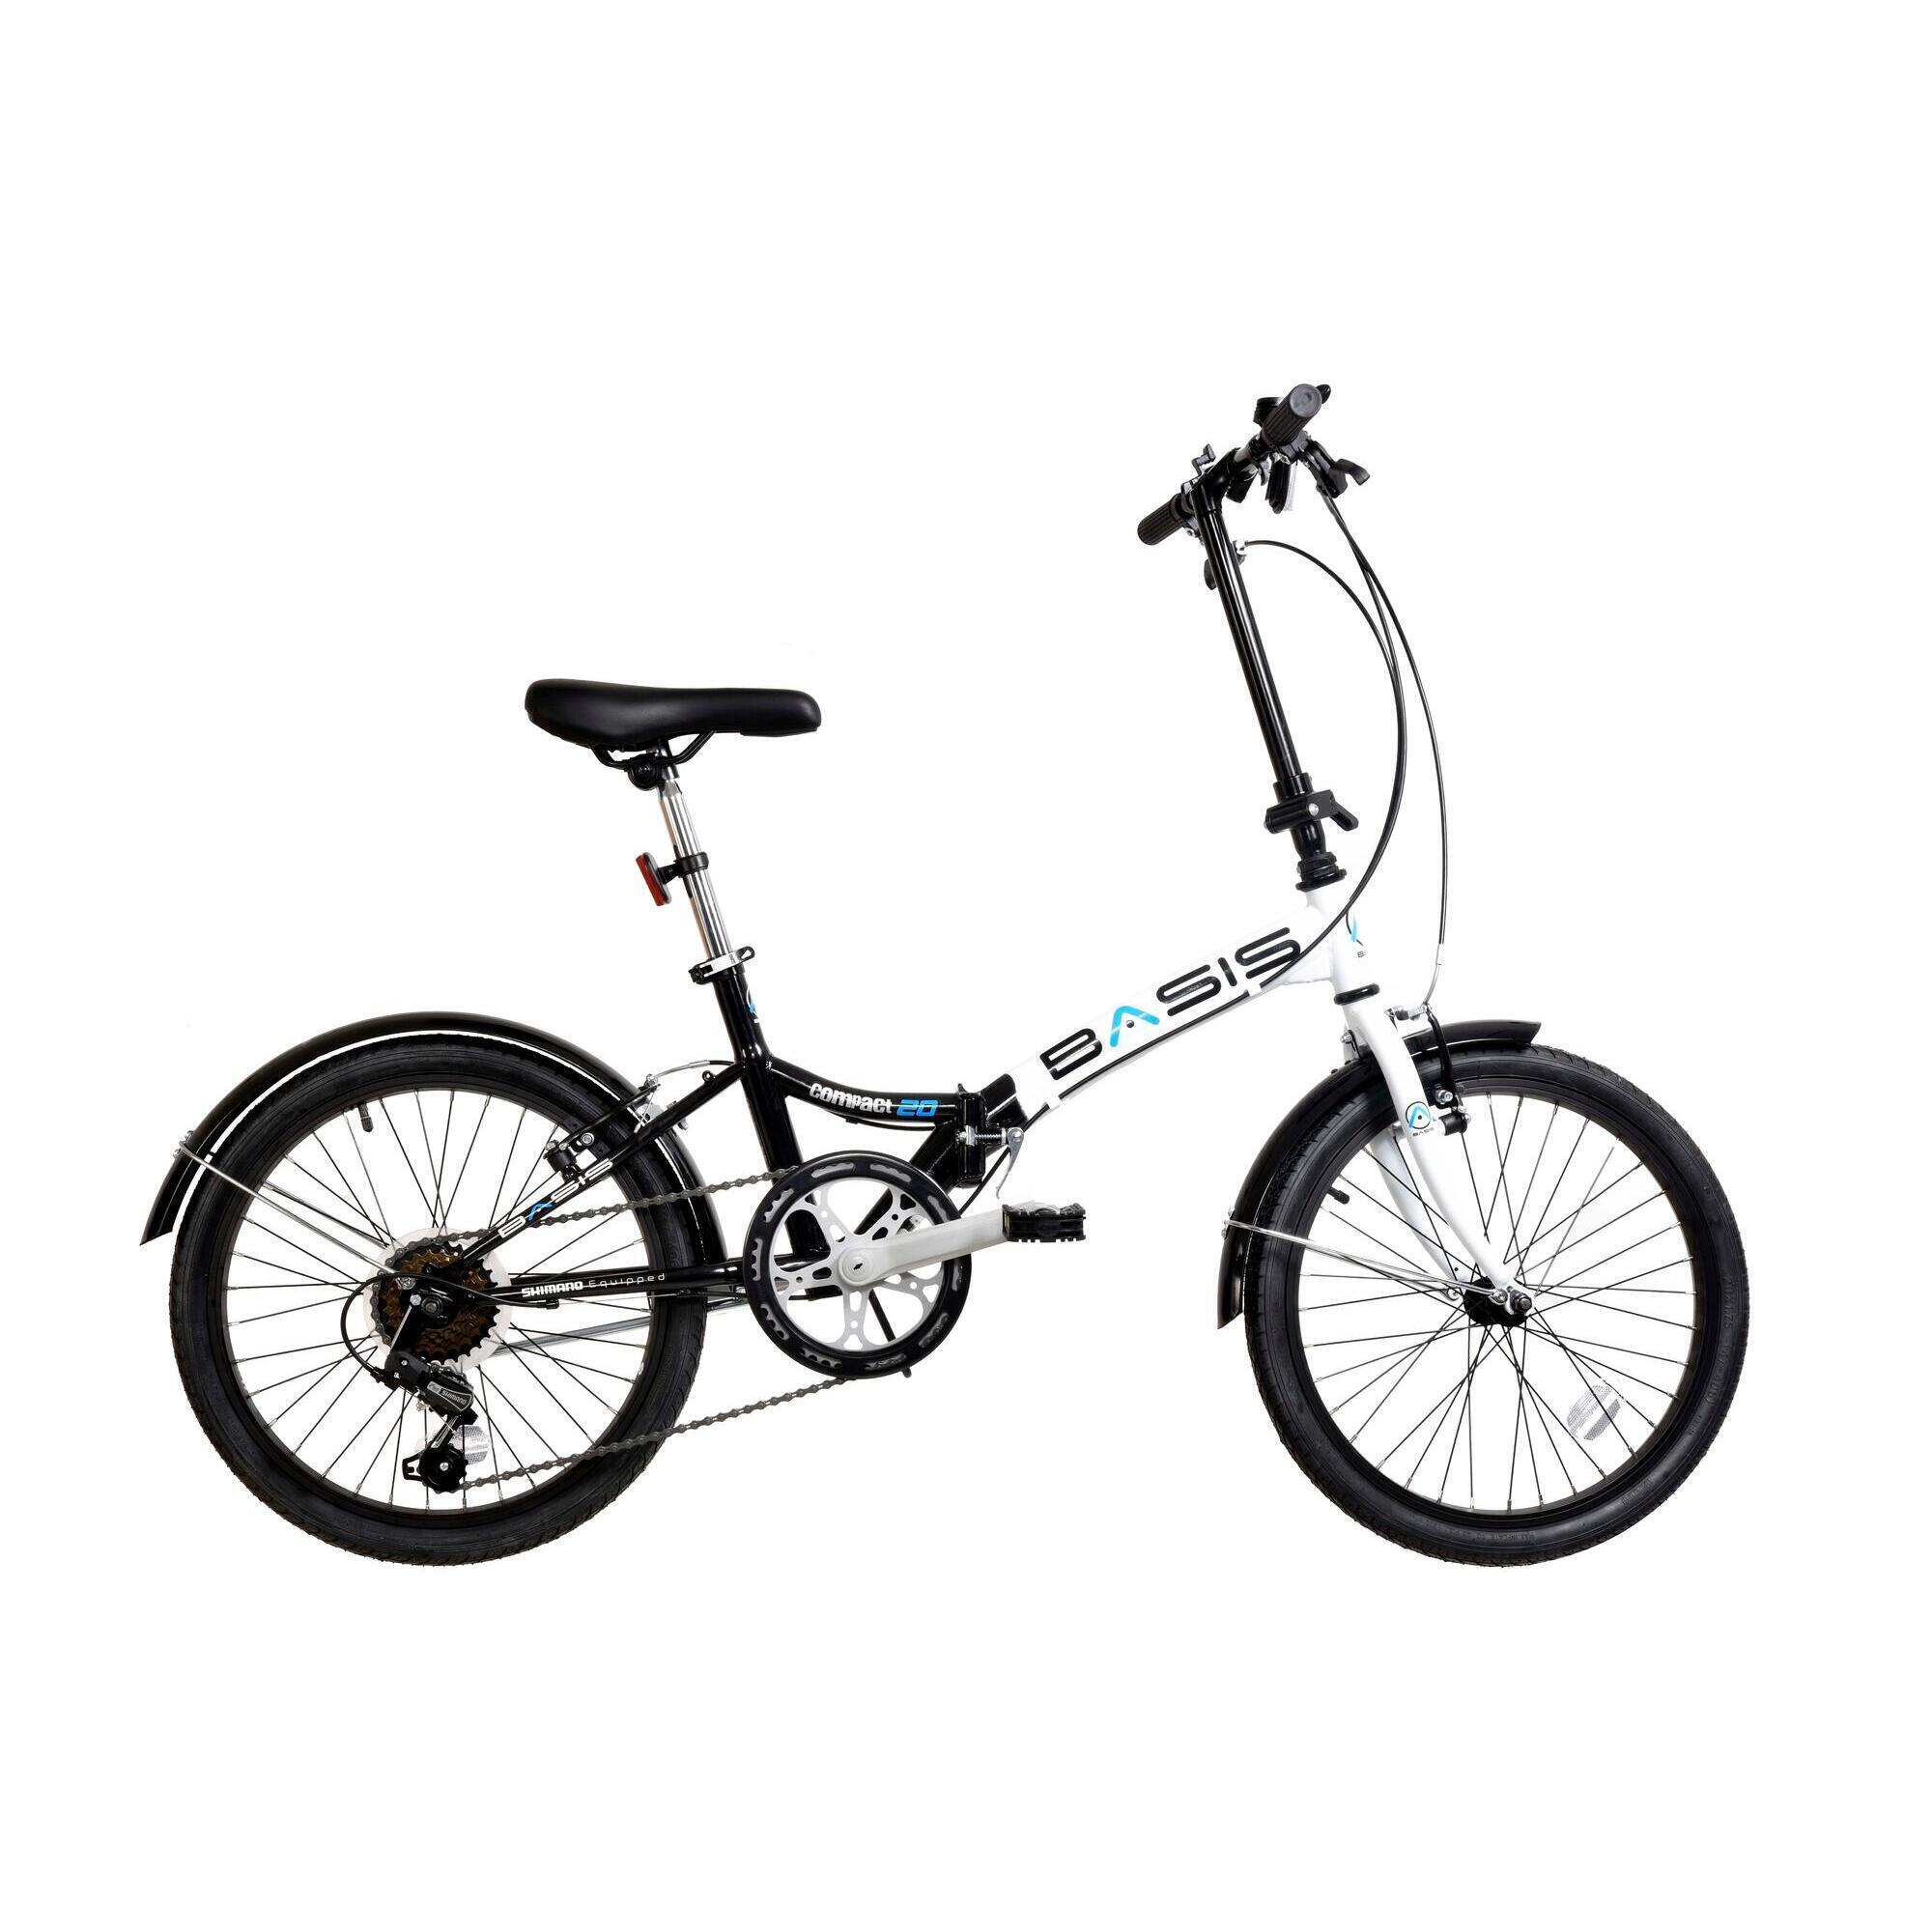 Basis Compact 20" Folding Commuter Bicycle - Black/White 1/2